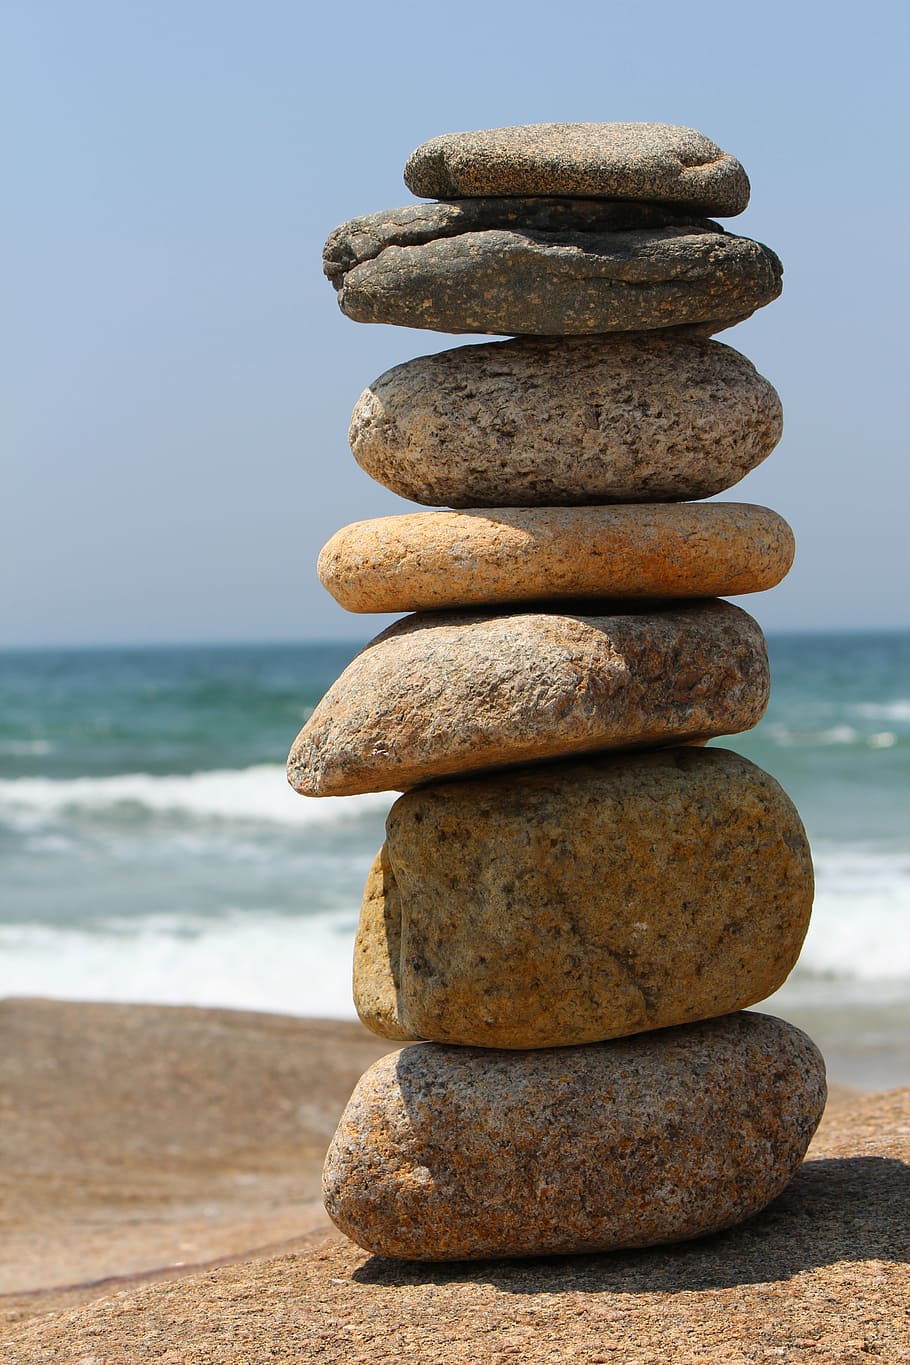 sea, roche, roller, stack, nature, view, blue, balance, pebble, stone - Object